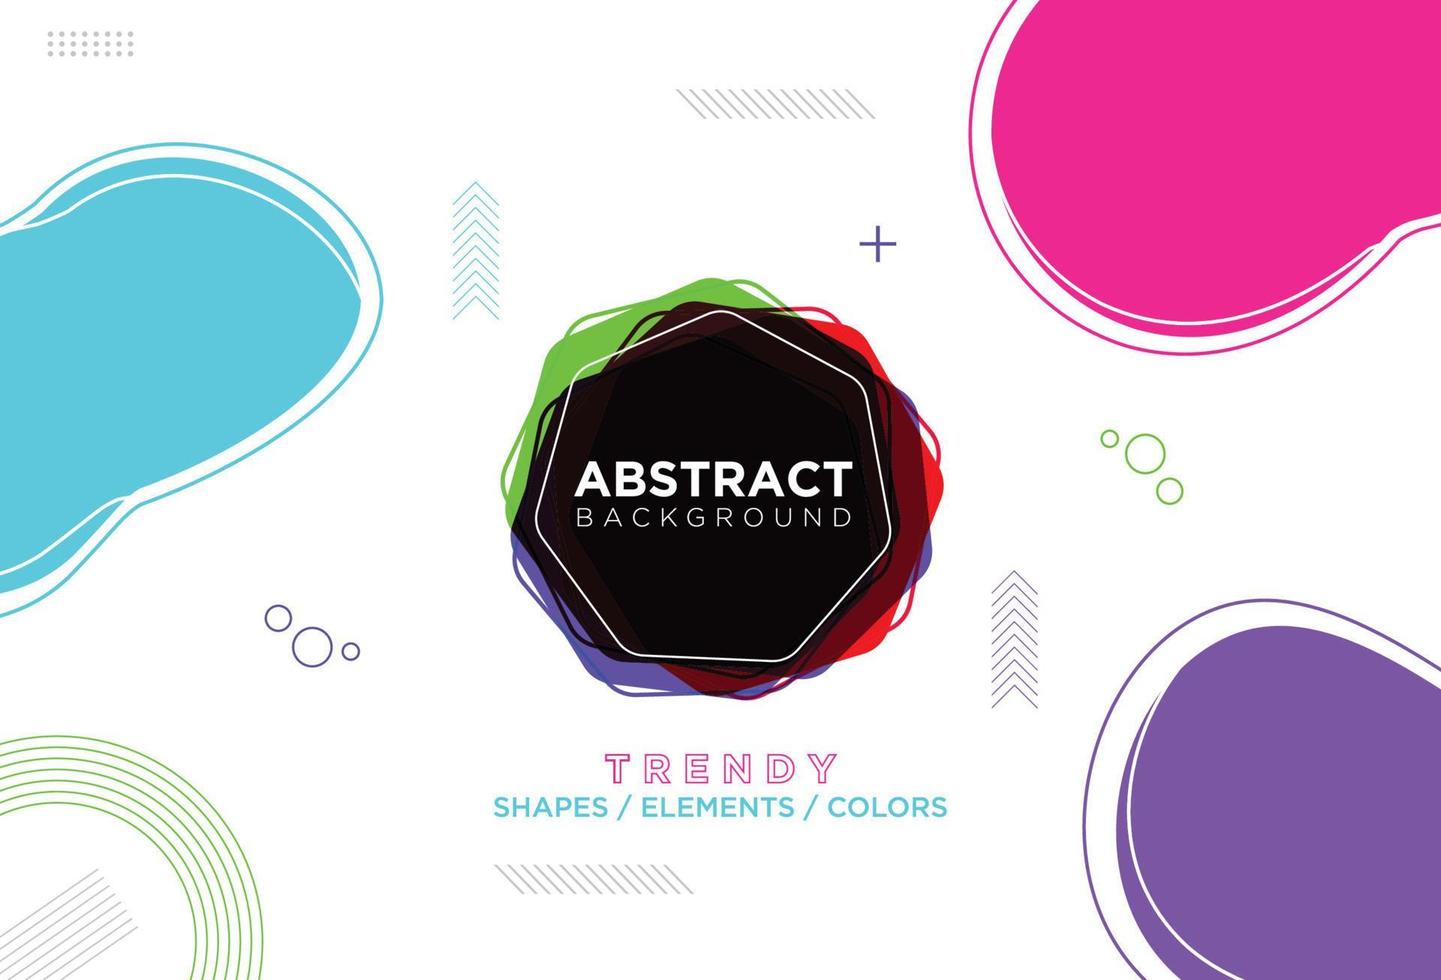 Geometric and Liquid Shapes Abstract Background Design With Modern Looks vector